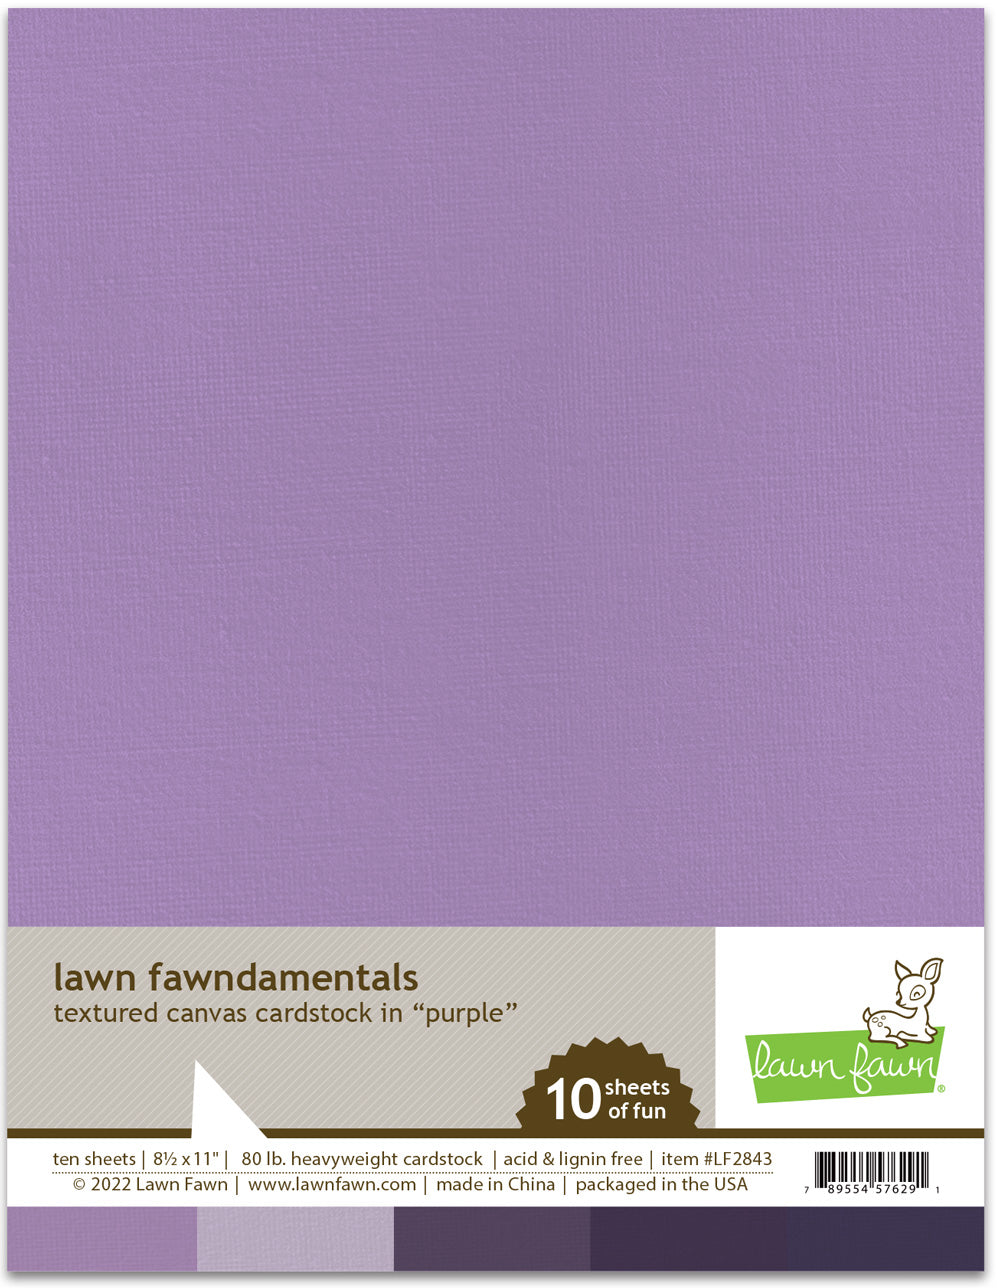 textured canvas cardstock - purple | Lawn Fawn